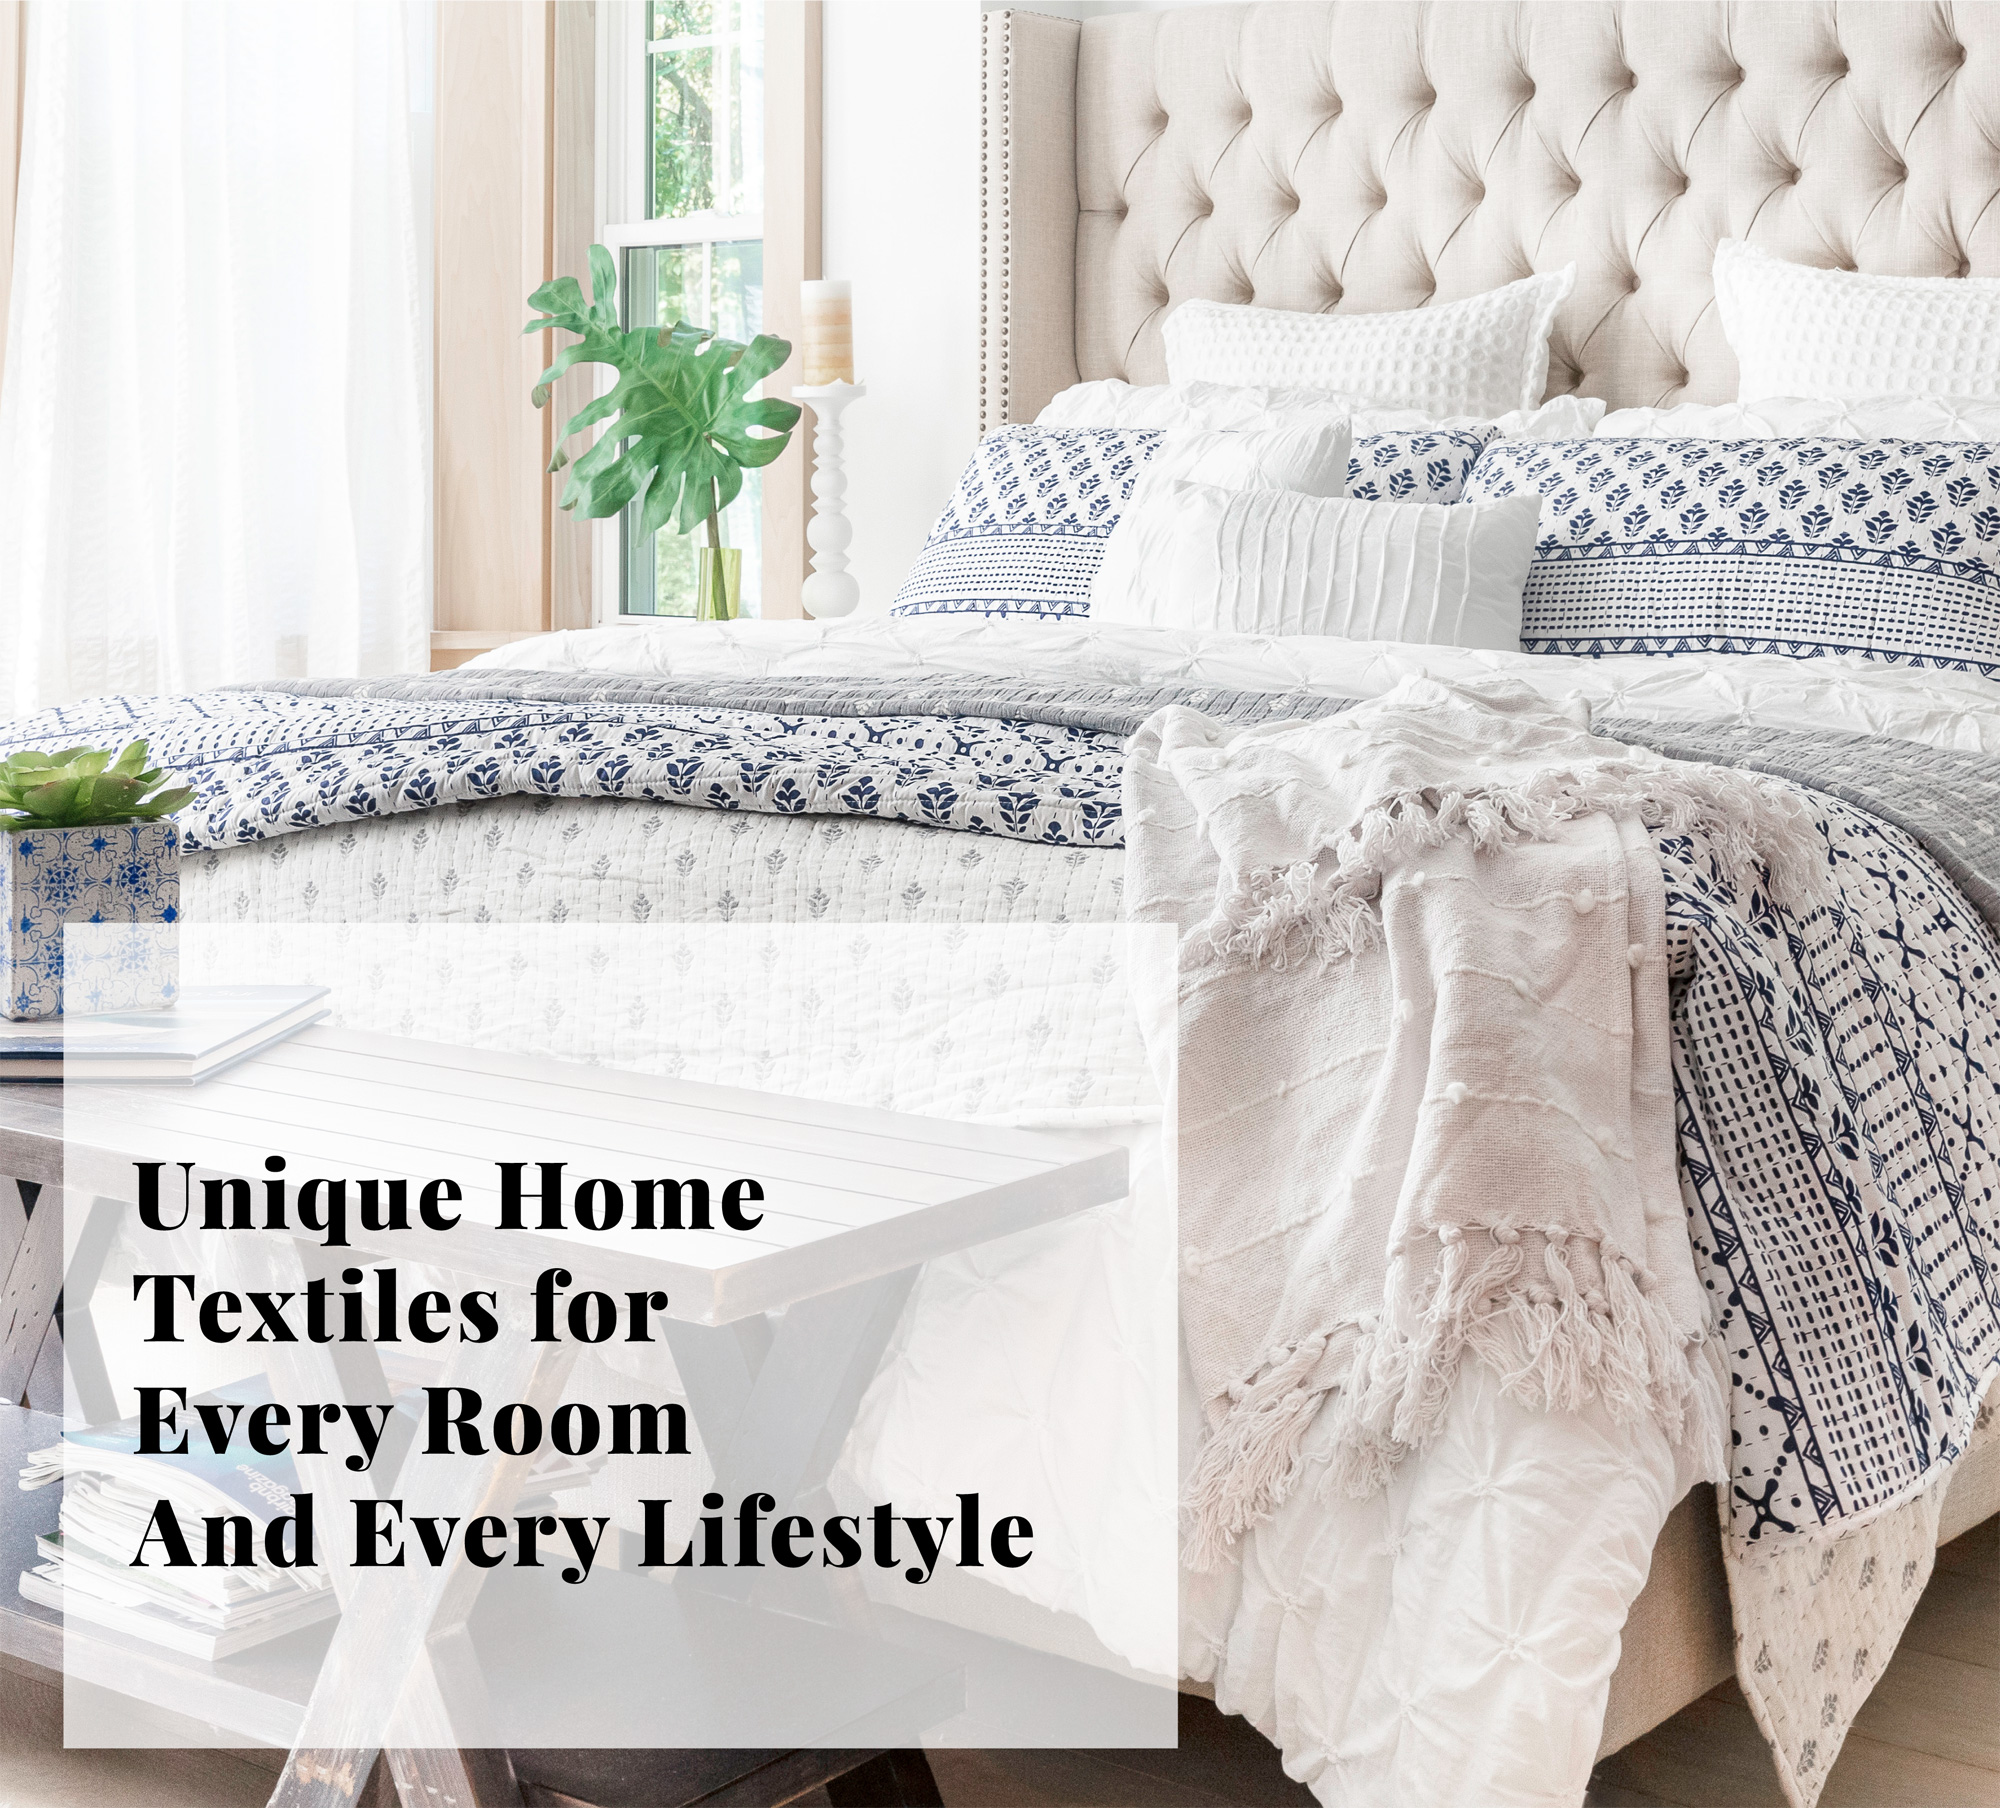 Unique Home Textiles for Every room and Every Lifestyle